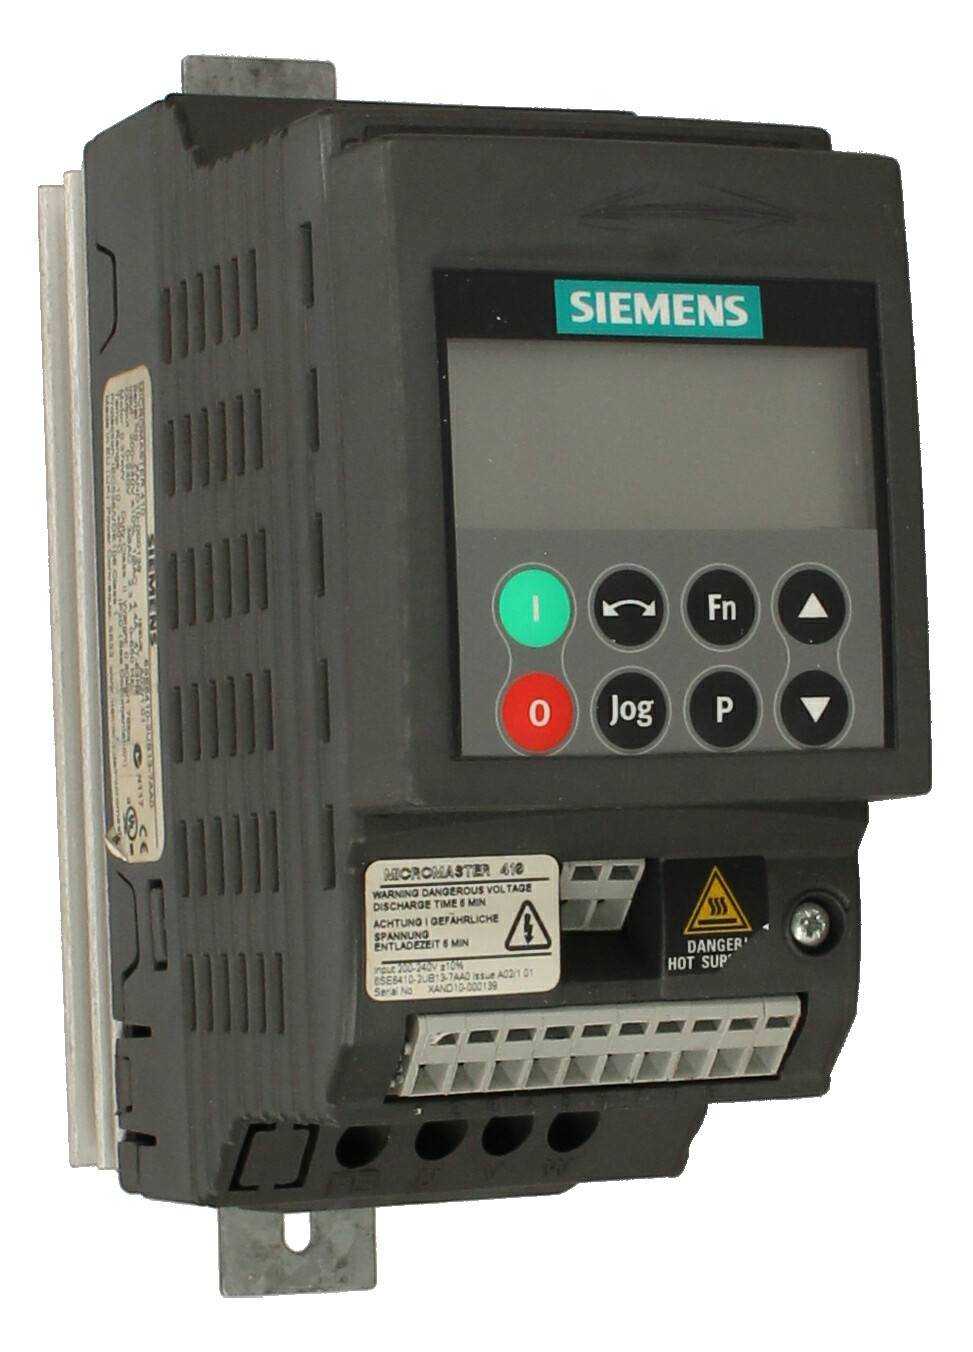 SIEMENS 6SE6410-2UB13-7AAD + MM410 VARIABLE FREQUENCY DRIVE + CONTROL PANEL (USED)